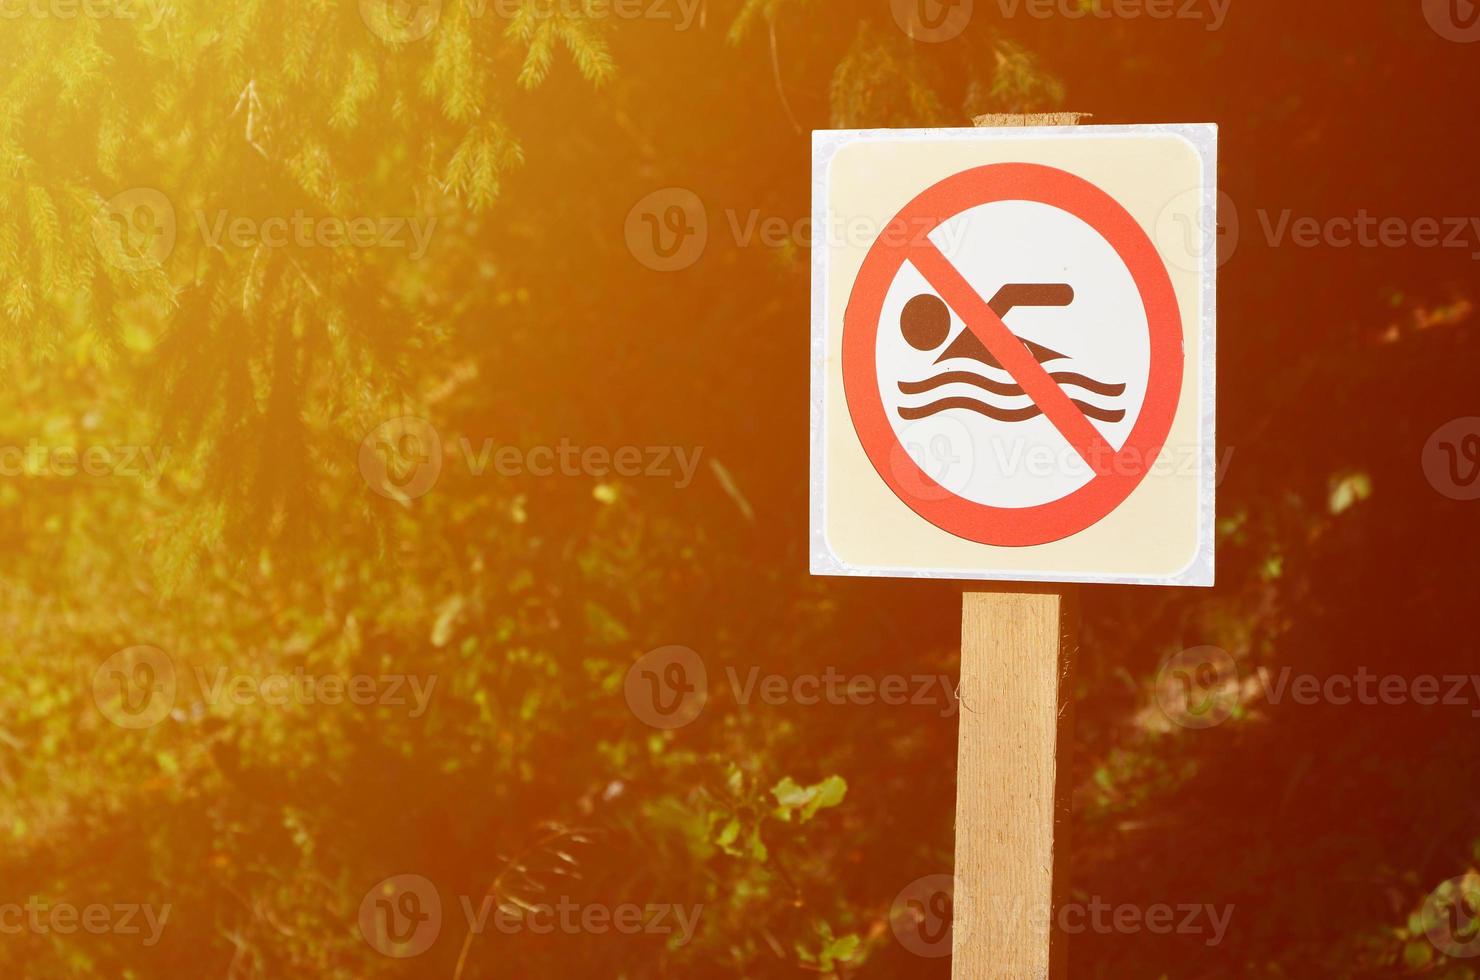 A pillar with a sign denoting a ban on swimming. The sign shows a crossed-out floating person photo